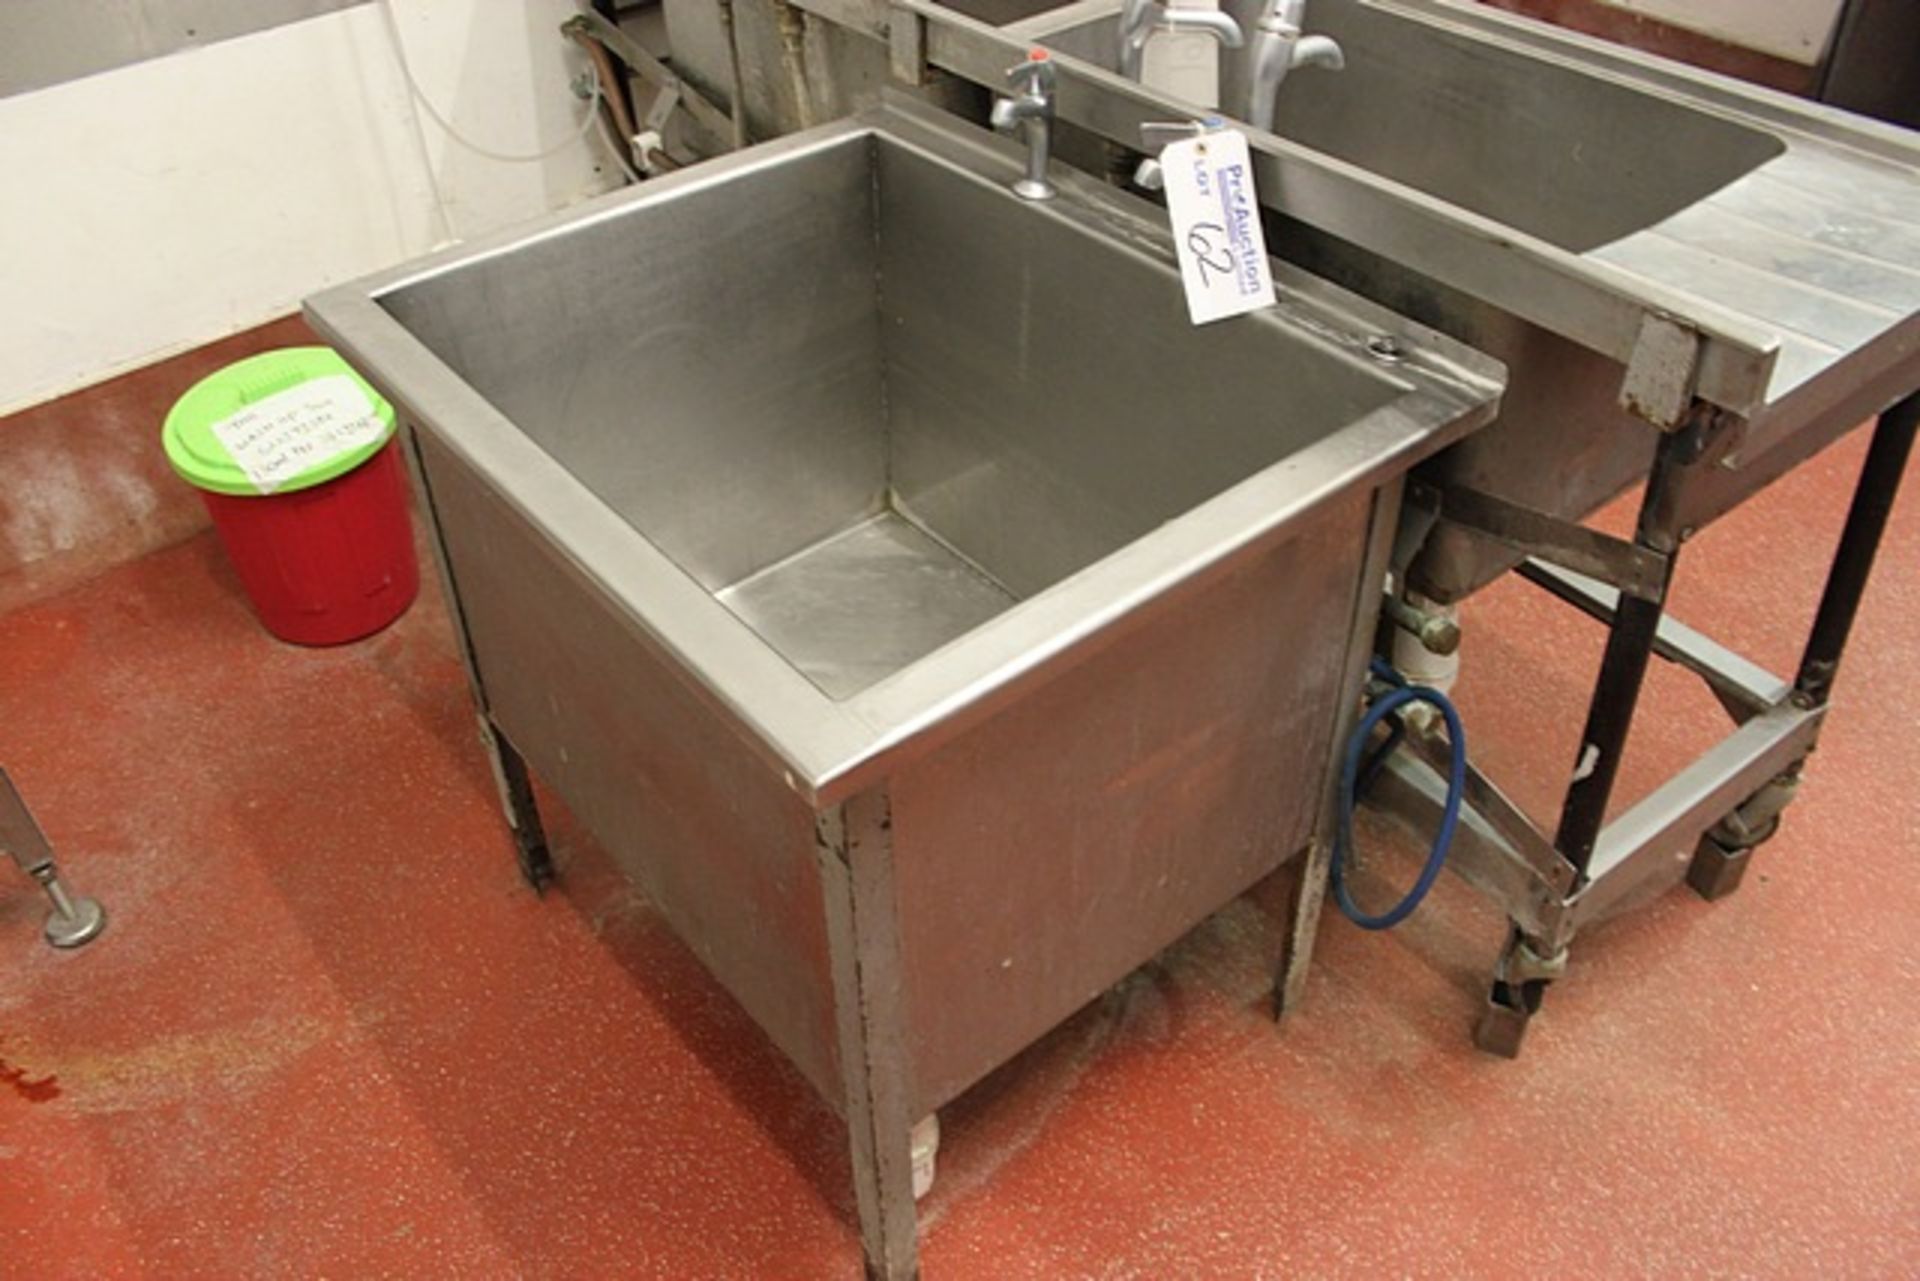 Stainless steel commercial Belfast style sink 870mm x 530mm deep